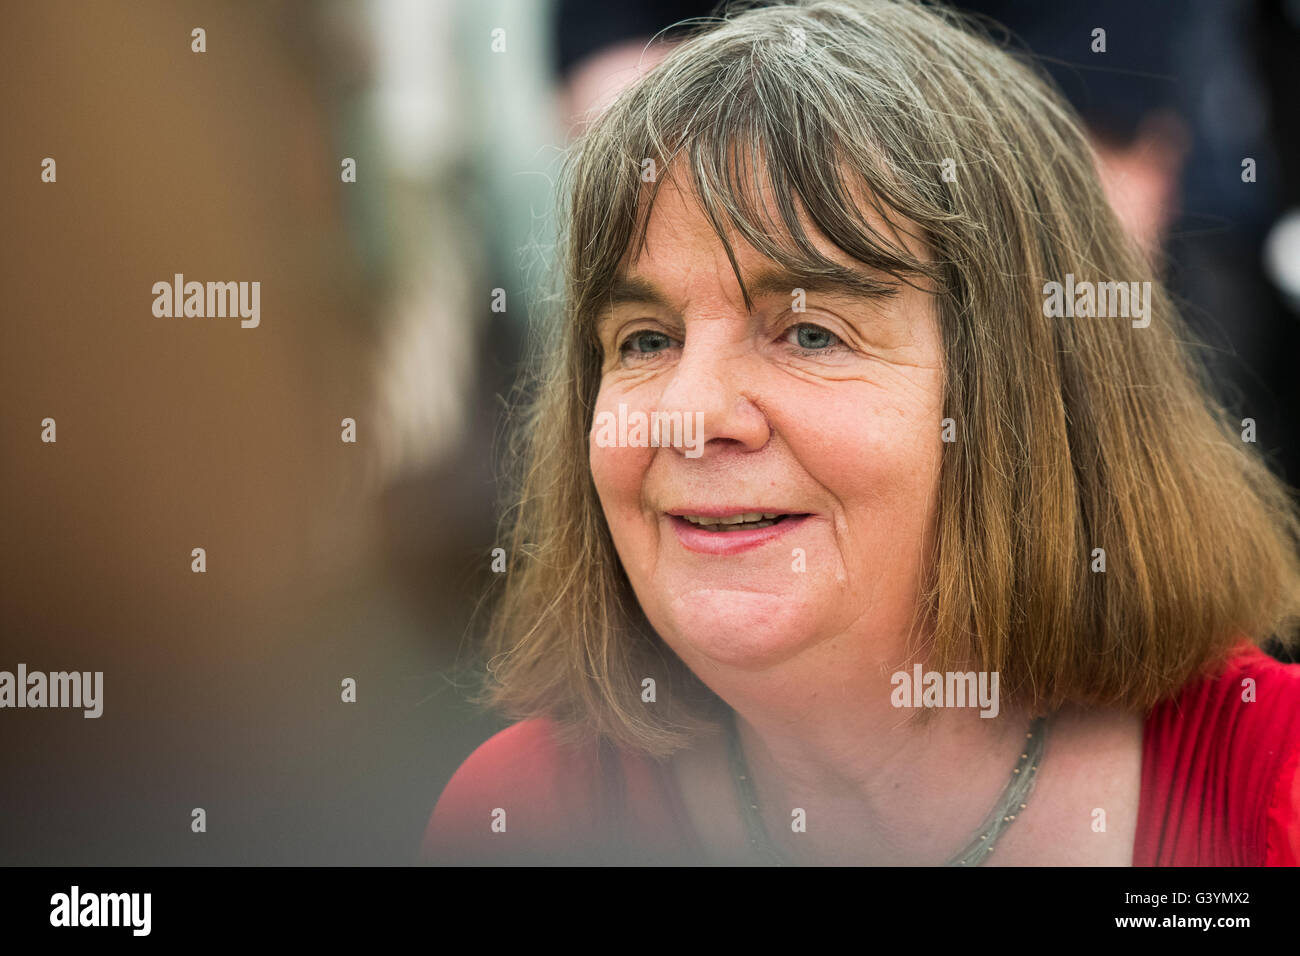 Julia Donaldson, English writer, playwright and performer, and the 2011–2013 Children's Laureate. Author of 'The Gruffalo' childrens book. The Hay Festival, Saturday 28 May 2016 Stock Photo